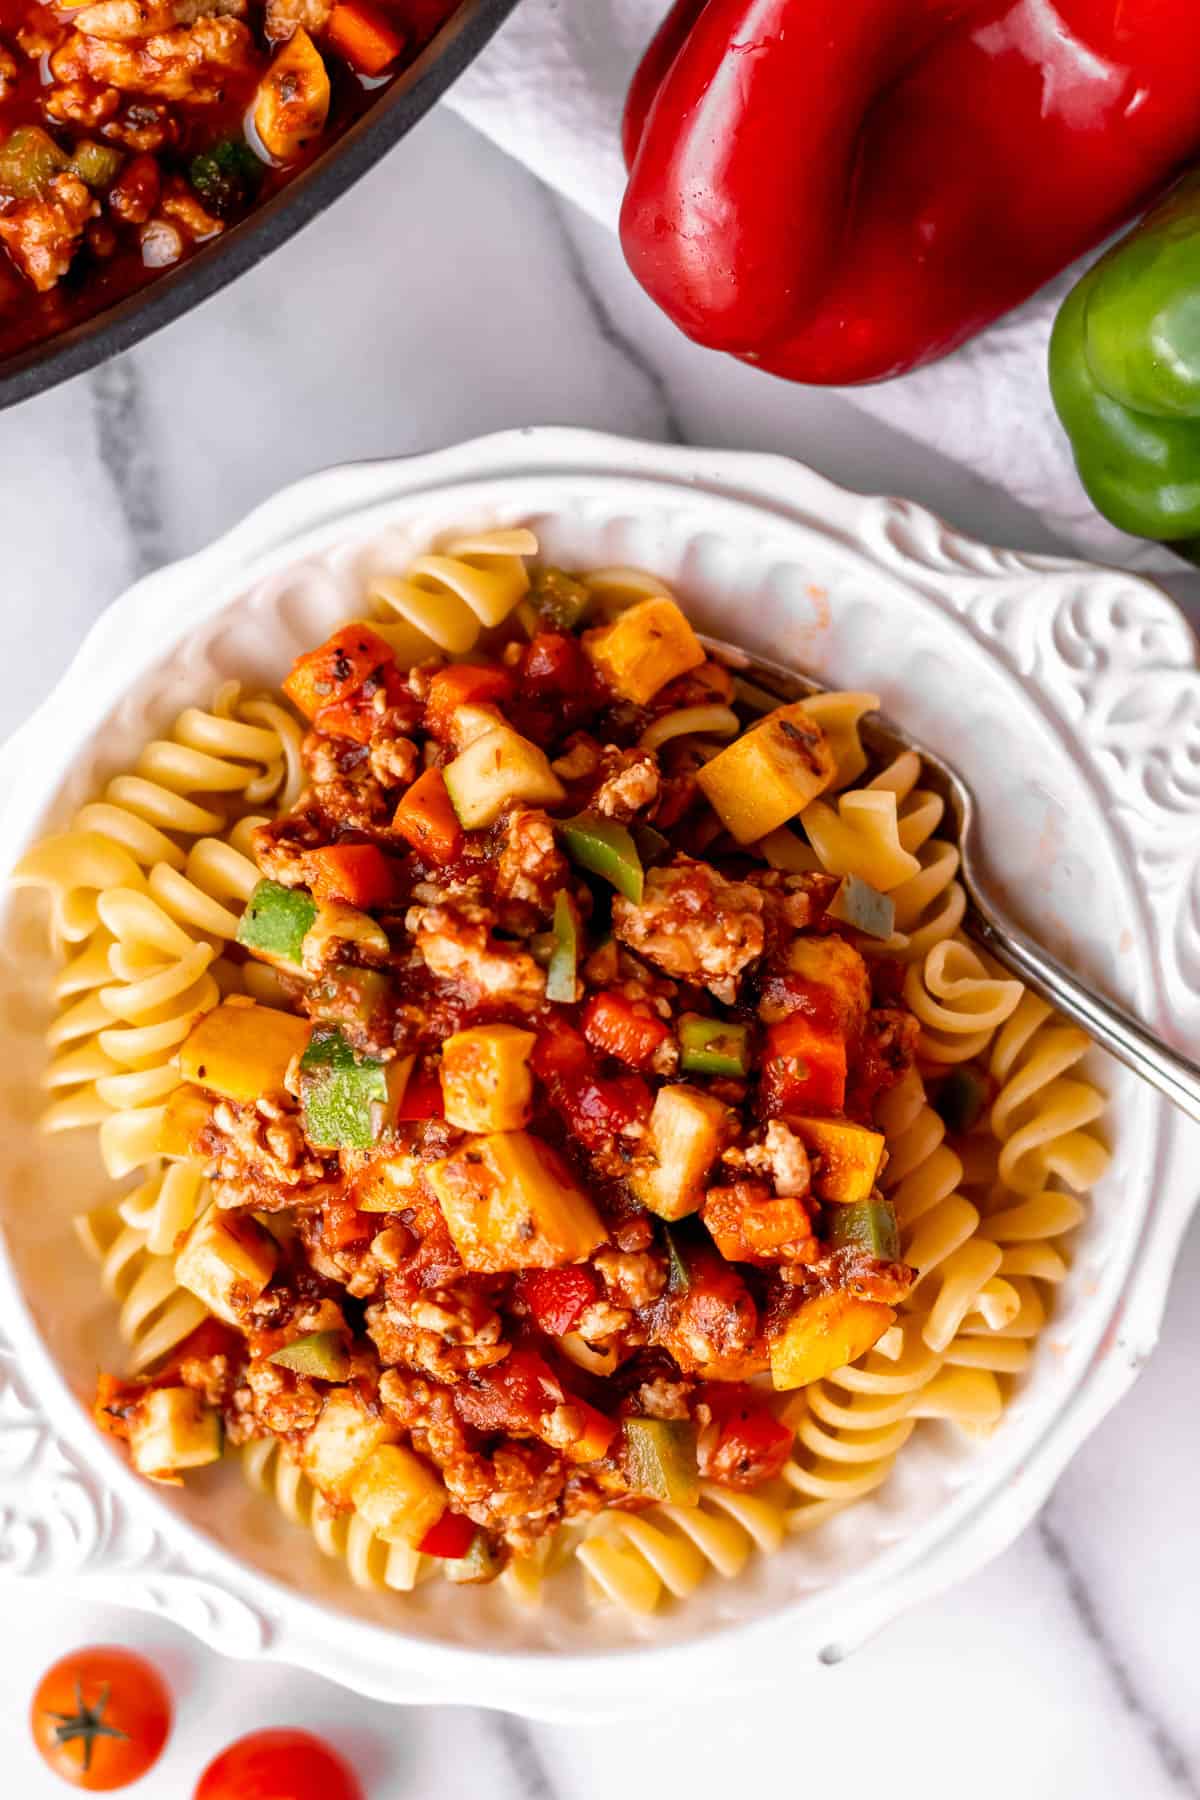 Pasta and vegetable spaghetti sauce in a white bowl with peppers and part of the skillet with more sauce in it partially showing.